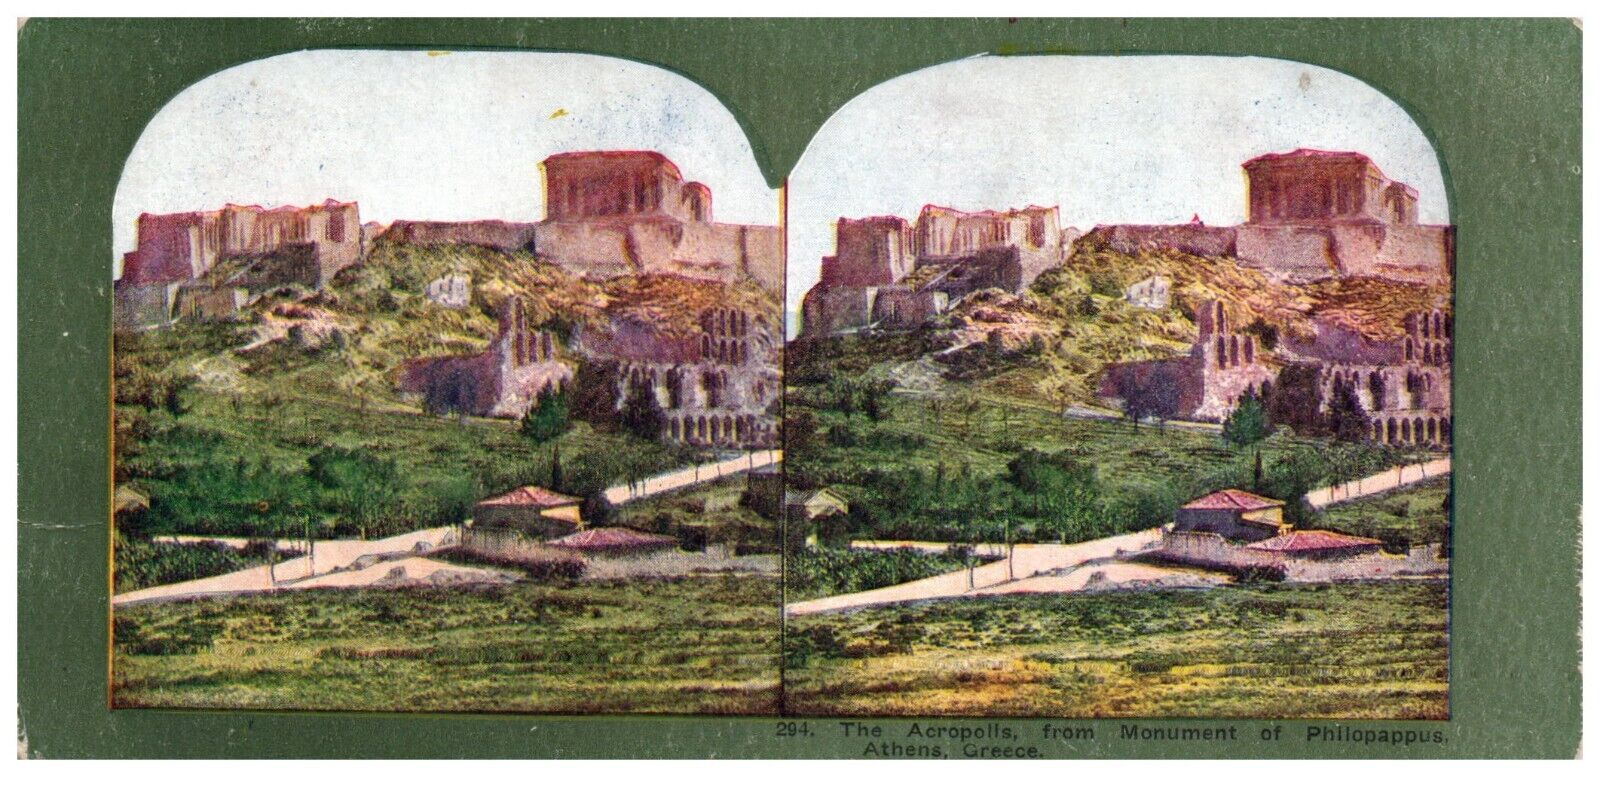 STEREOSCOPE THE ACROPOLIS FROM MONUMENT PHILOPAPPUS ATHENS GREECE CARD 294